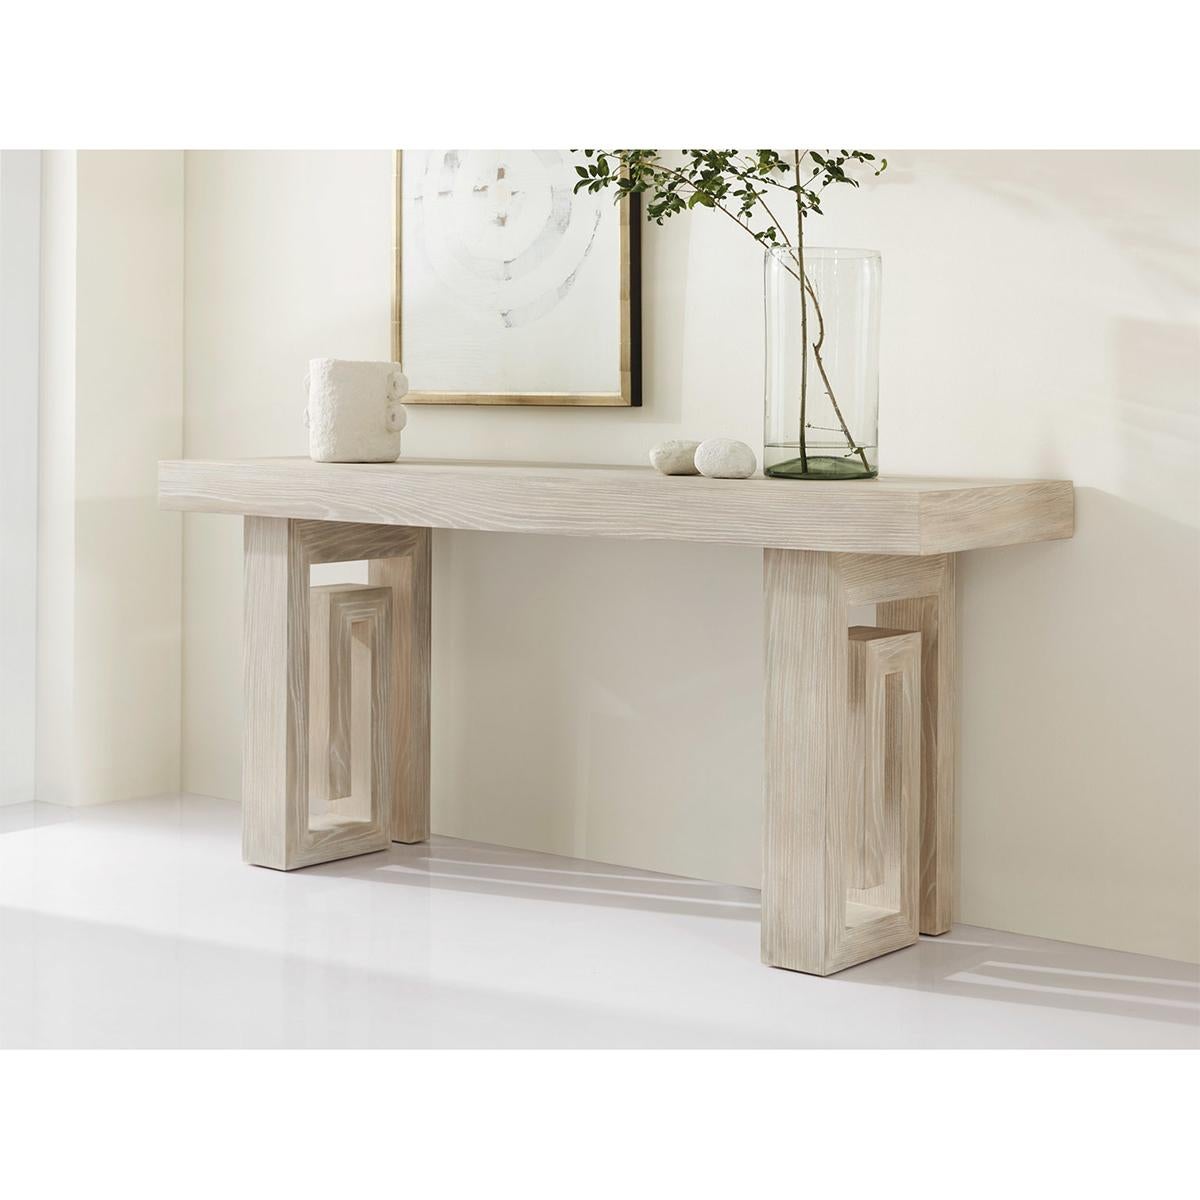 Large console with whitewash ash veneer has a bold block form top raised on two Greek key shaped pedestal legs.

Dimensions: 70